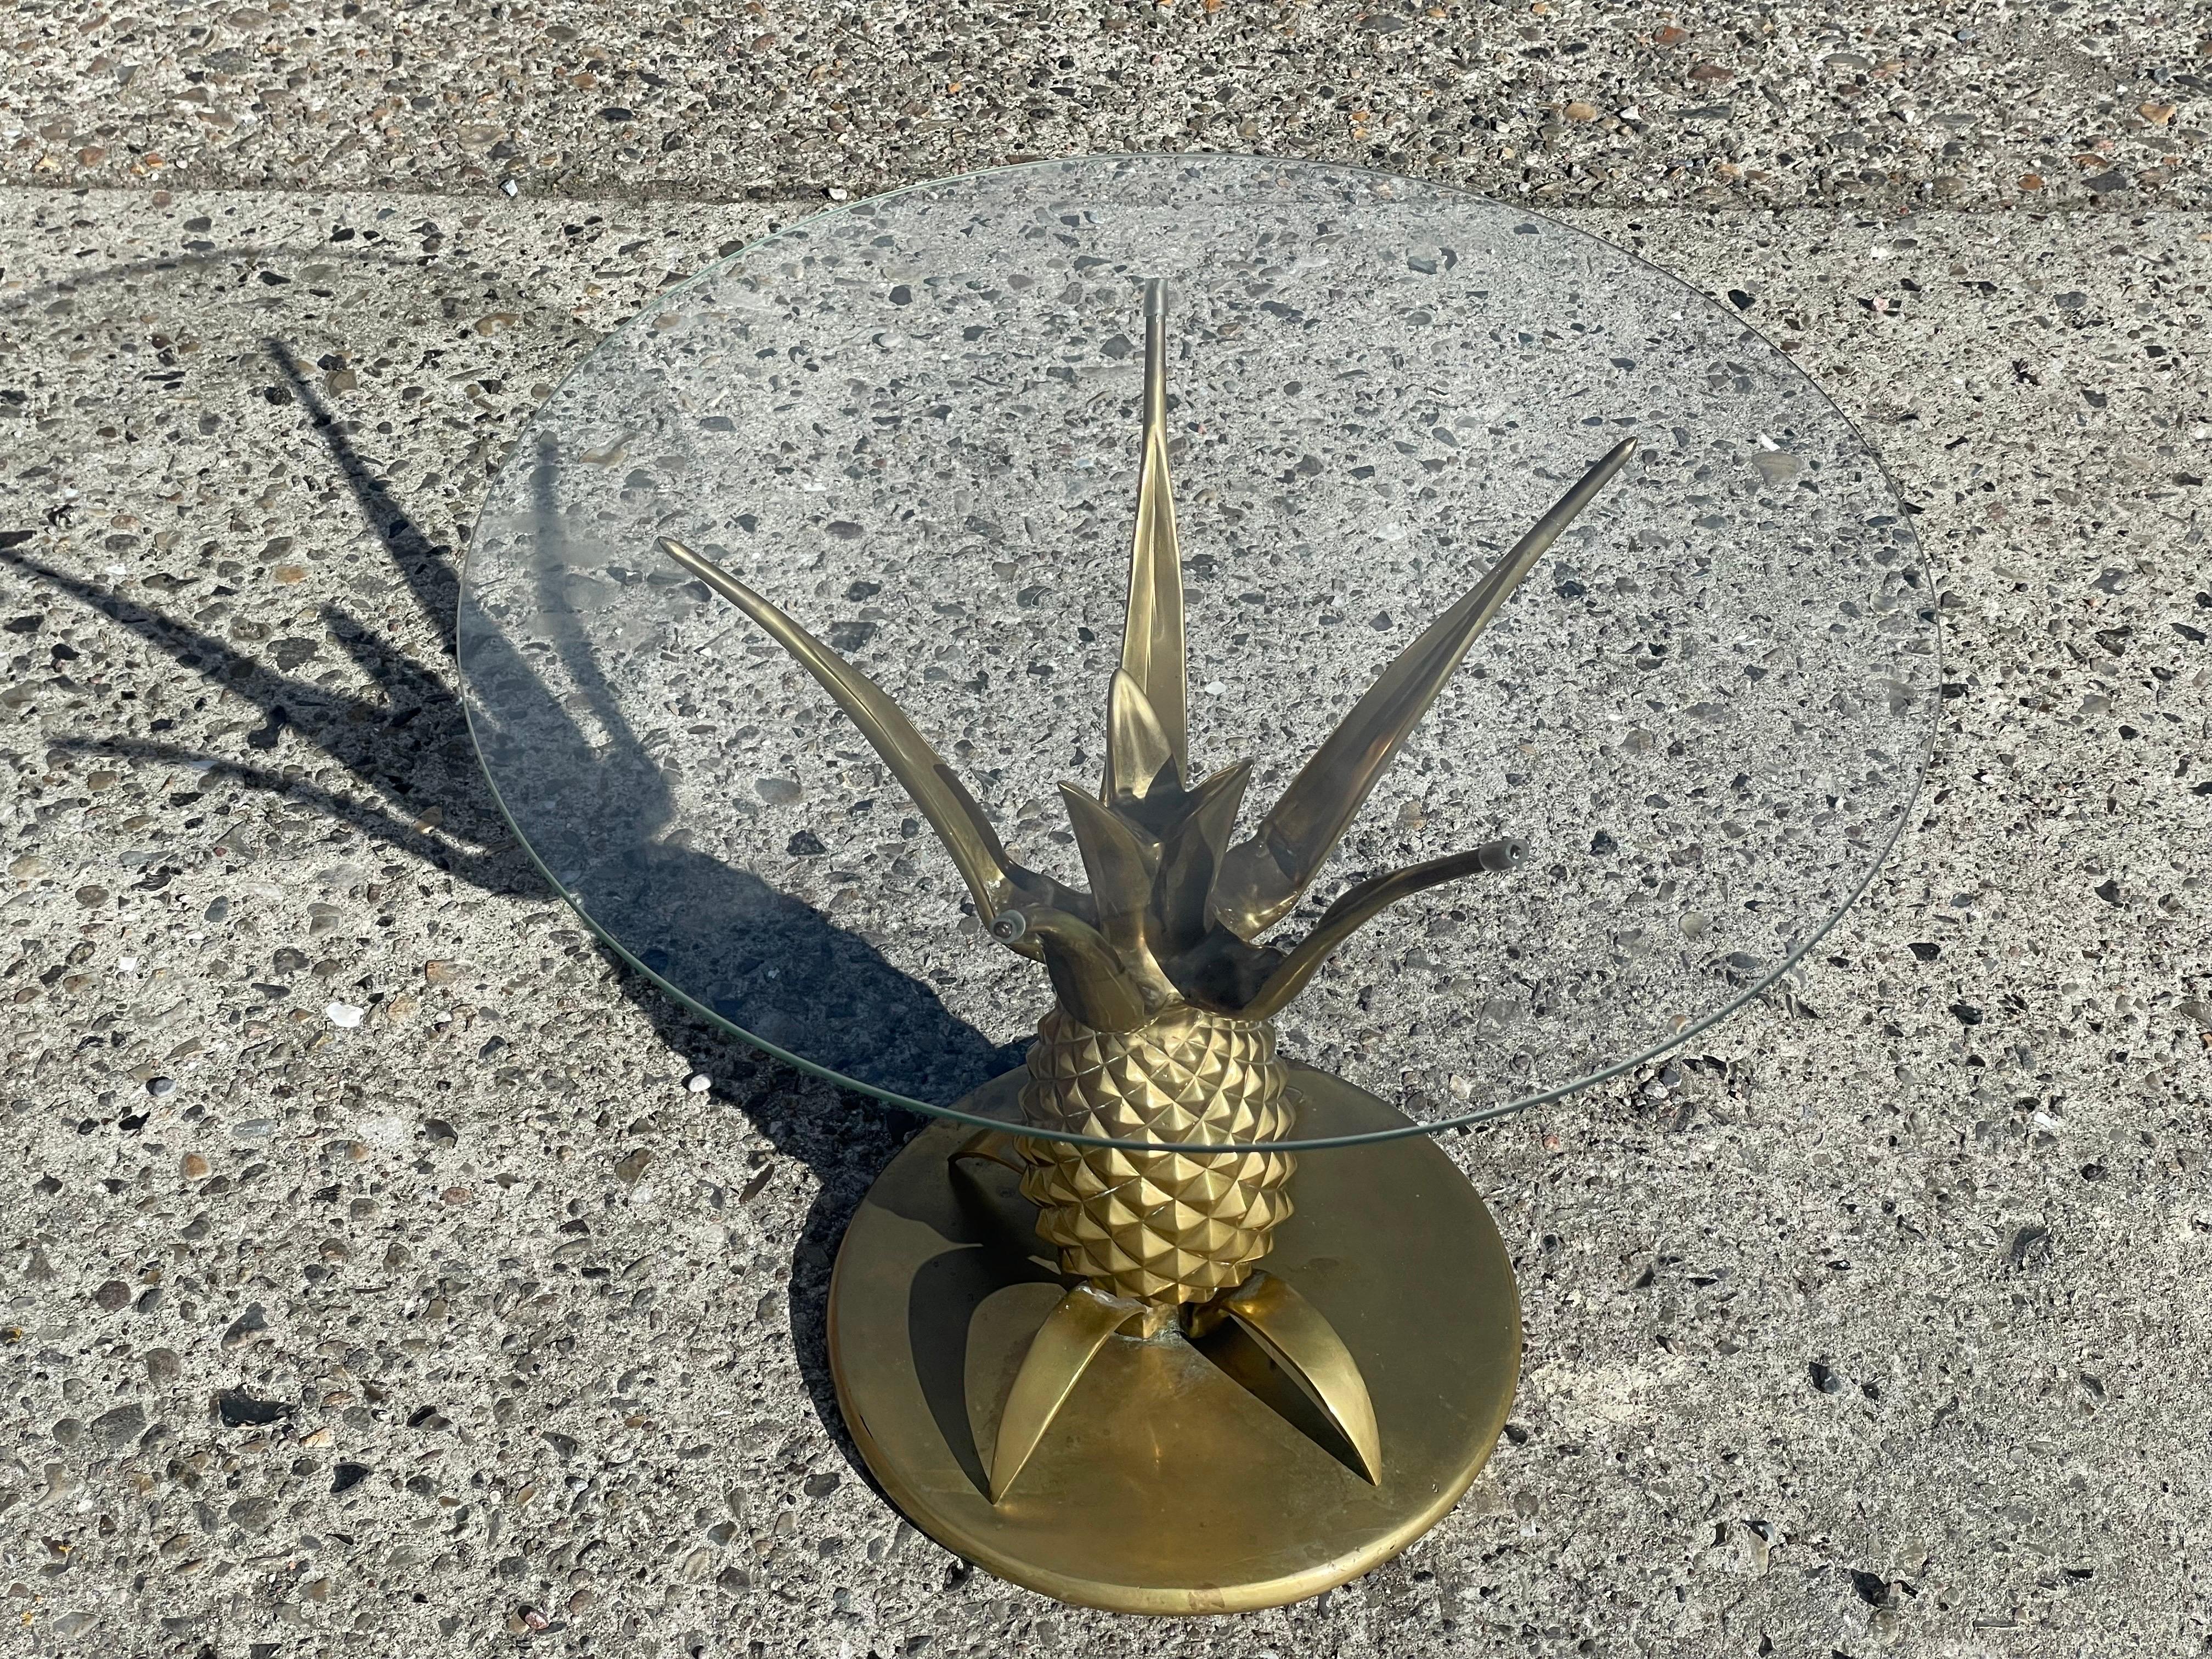 The pineapple side table in brass with glass is a glamorous Hollywood Regency style piece from the 1970s that is sure to make a statement in any room. The table features a stunning brass pineapple base with intricate detailing and a sleek glass top